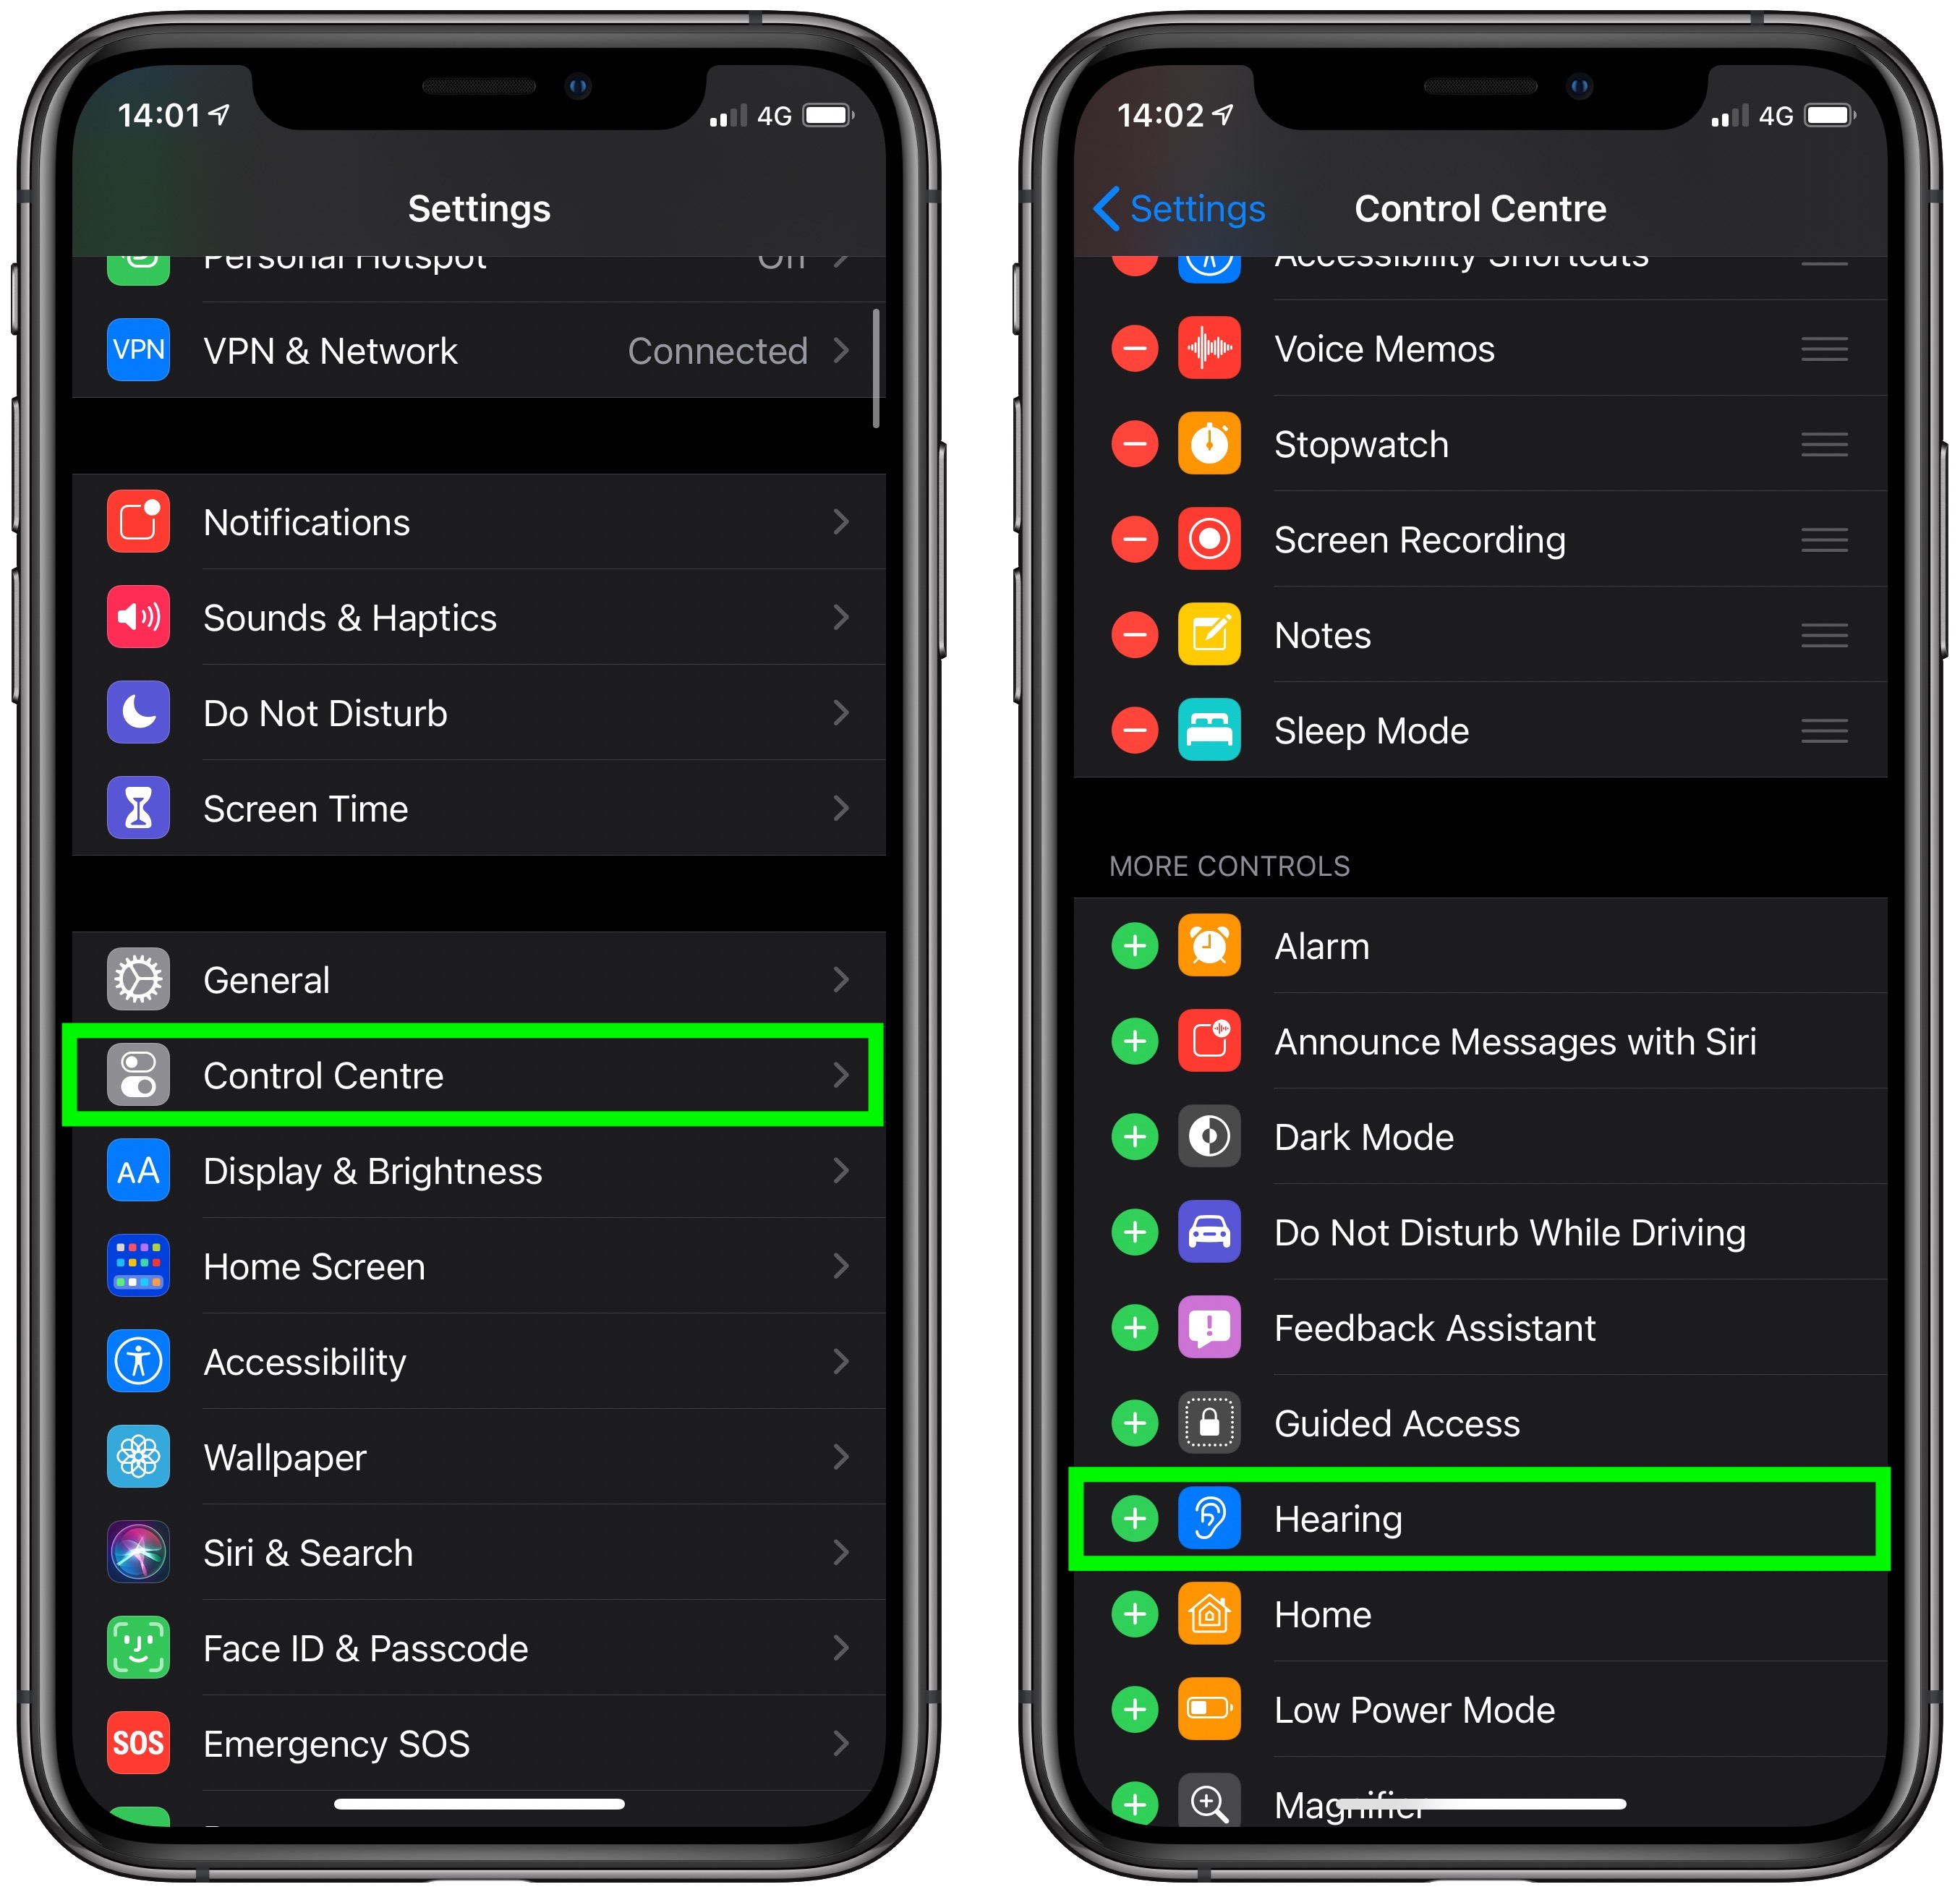 lemmer pulsåre Og hold iOS 14: How to Check Headphone Audio Level in Real Time - MacRumors